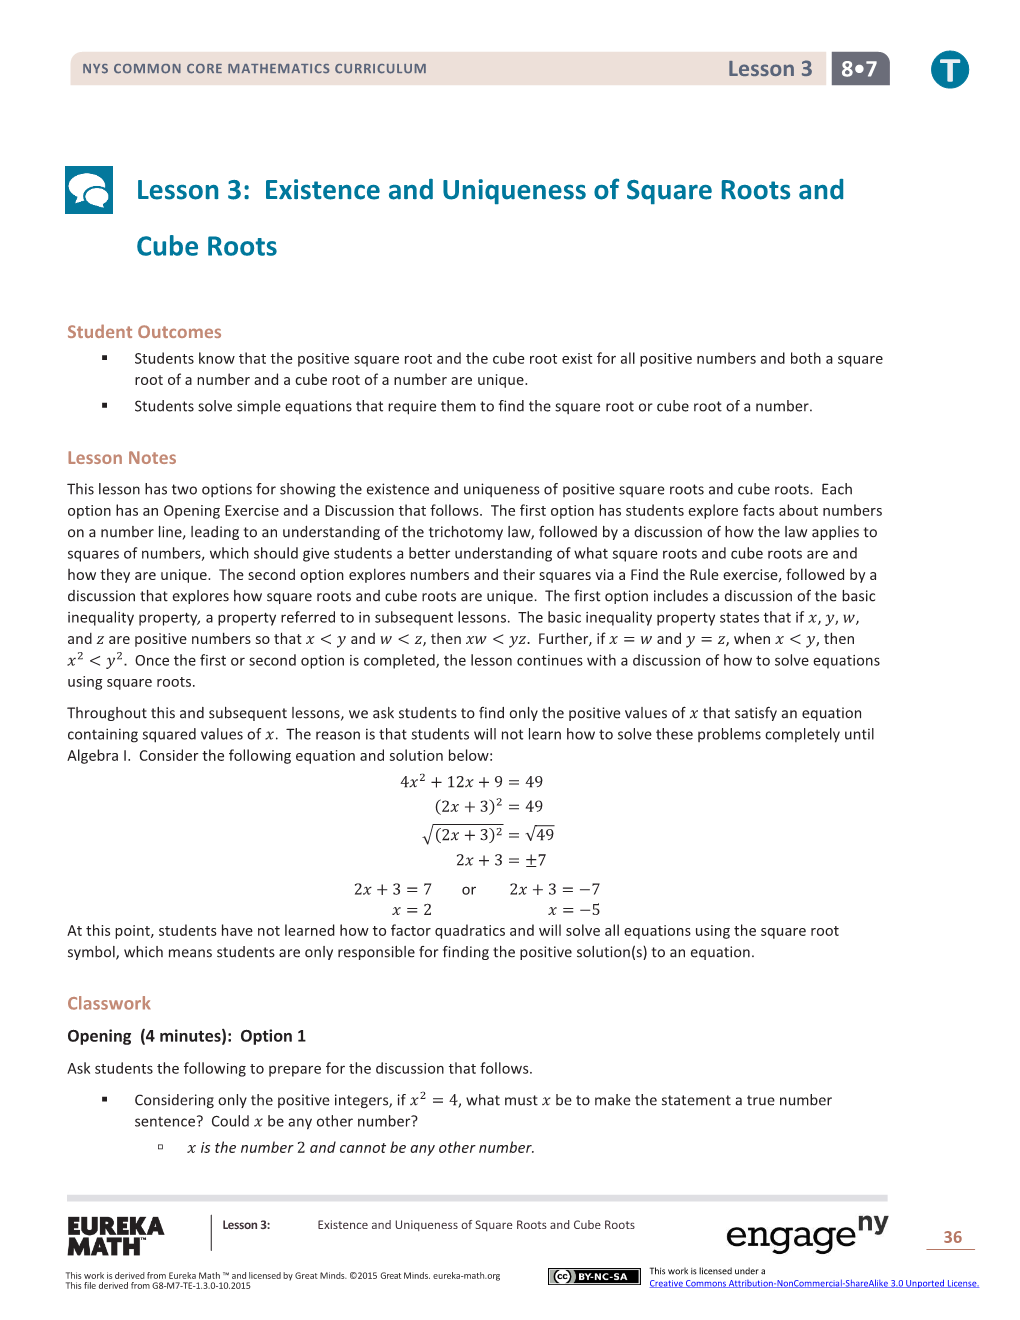 Lesson 3: Existence and Uniqueness of Square Roots and Cube Roots